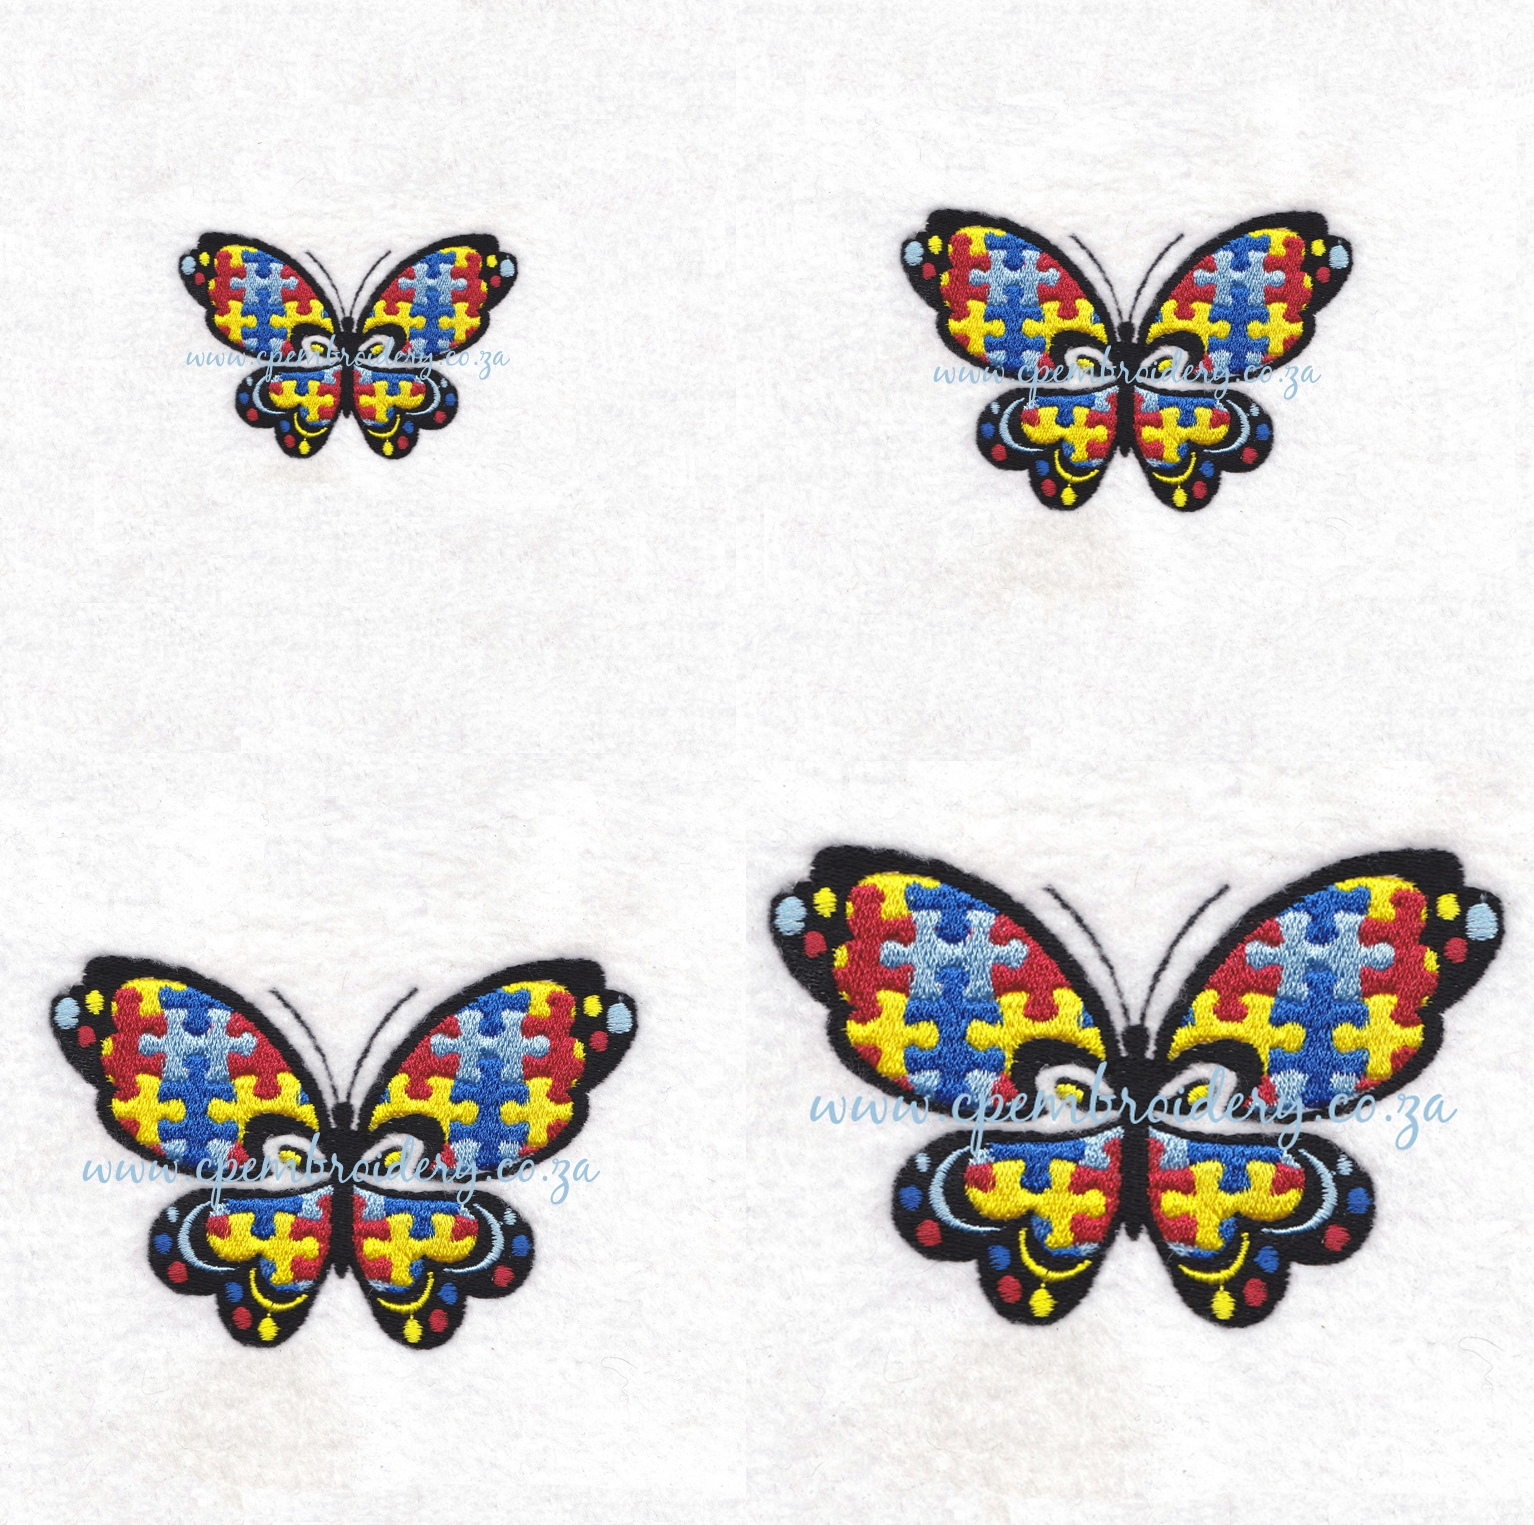 Butterfly Embroidery Pattern Puzzled Butterfly